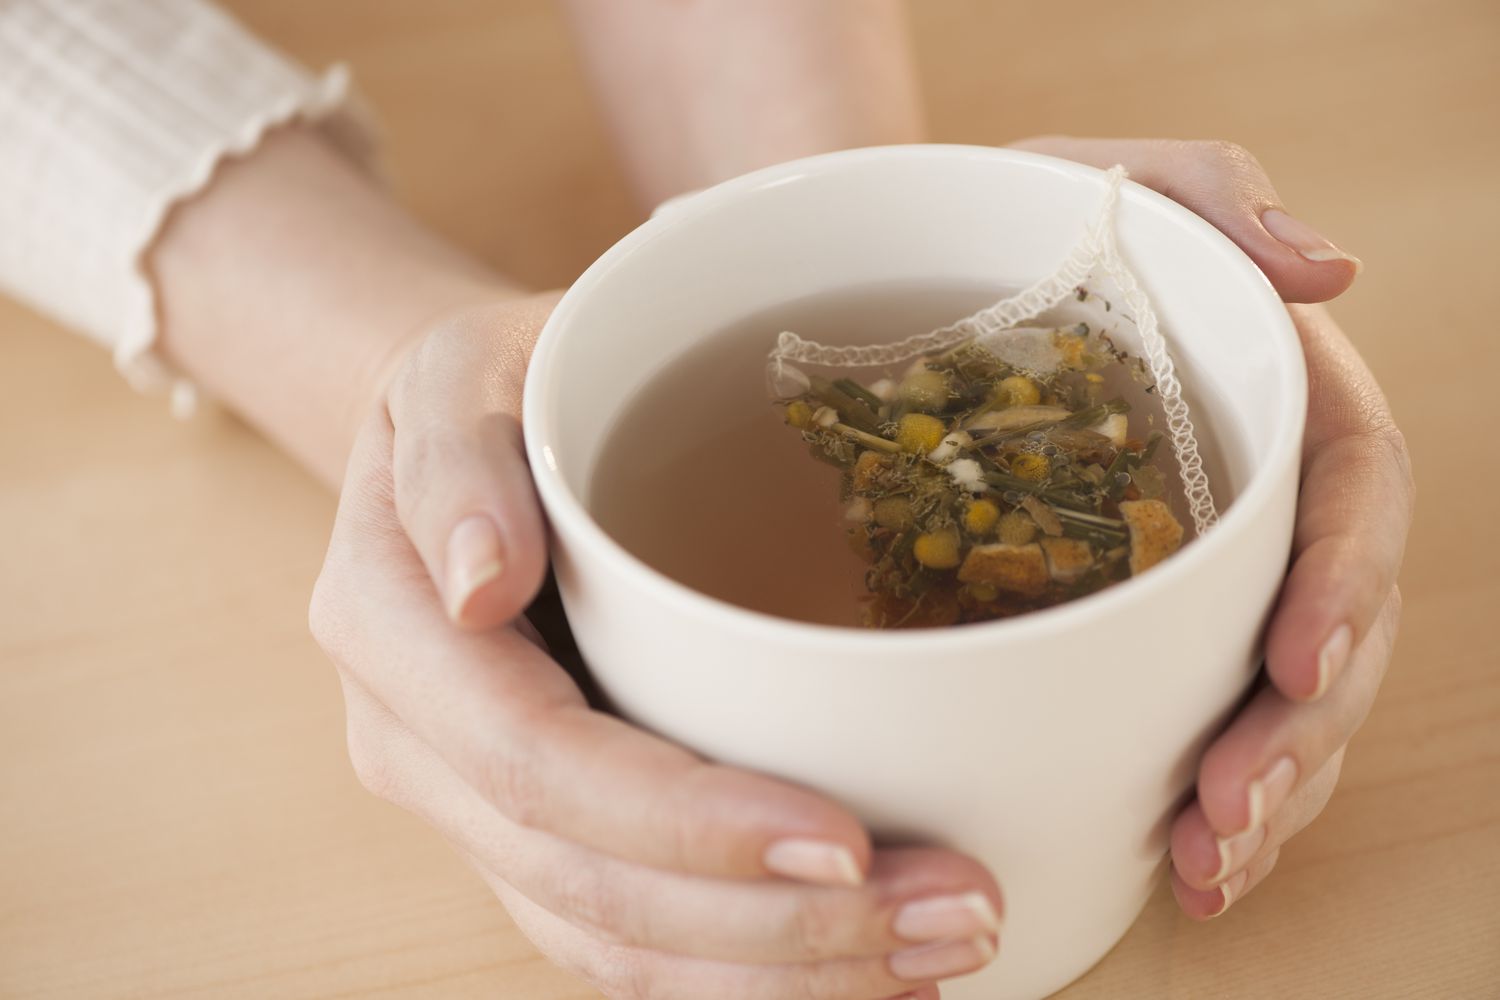 How To Make Chamomile Tea From Plant